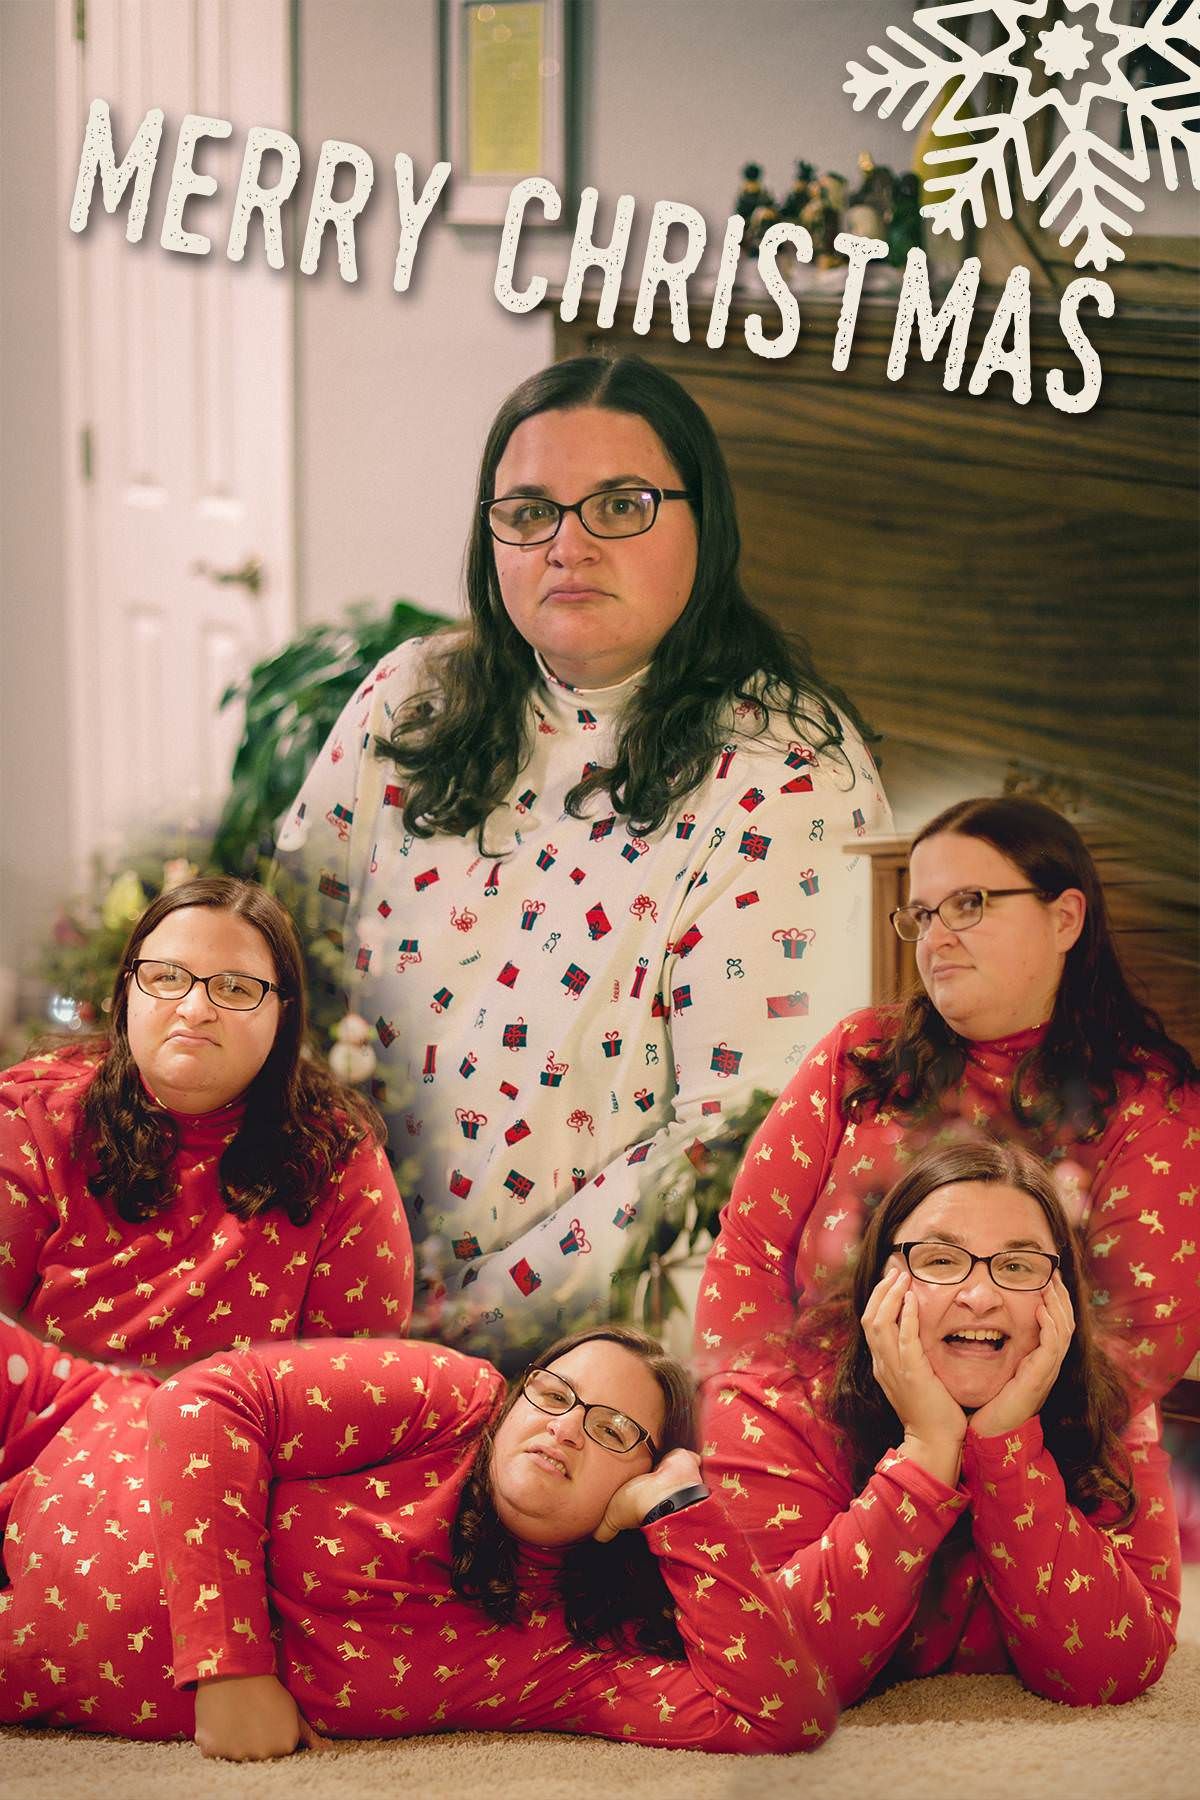 Every year I try to outdo the previous years Christmas card. This year didn't beat last years but I still think it's good.